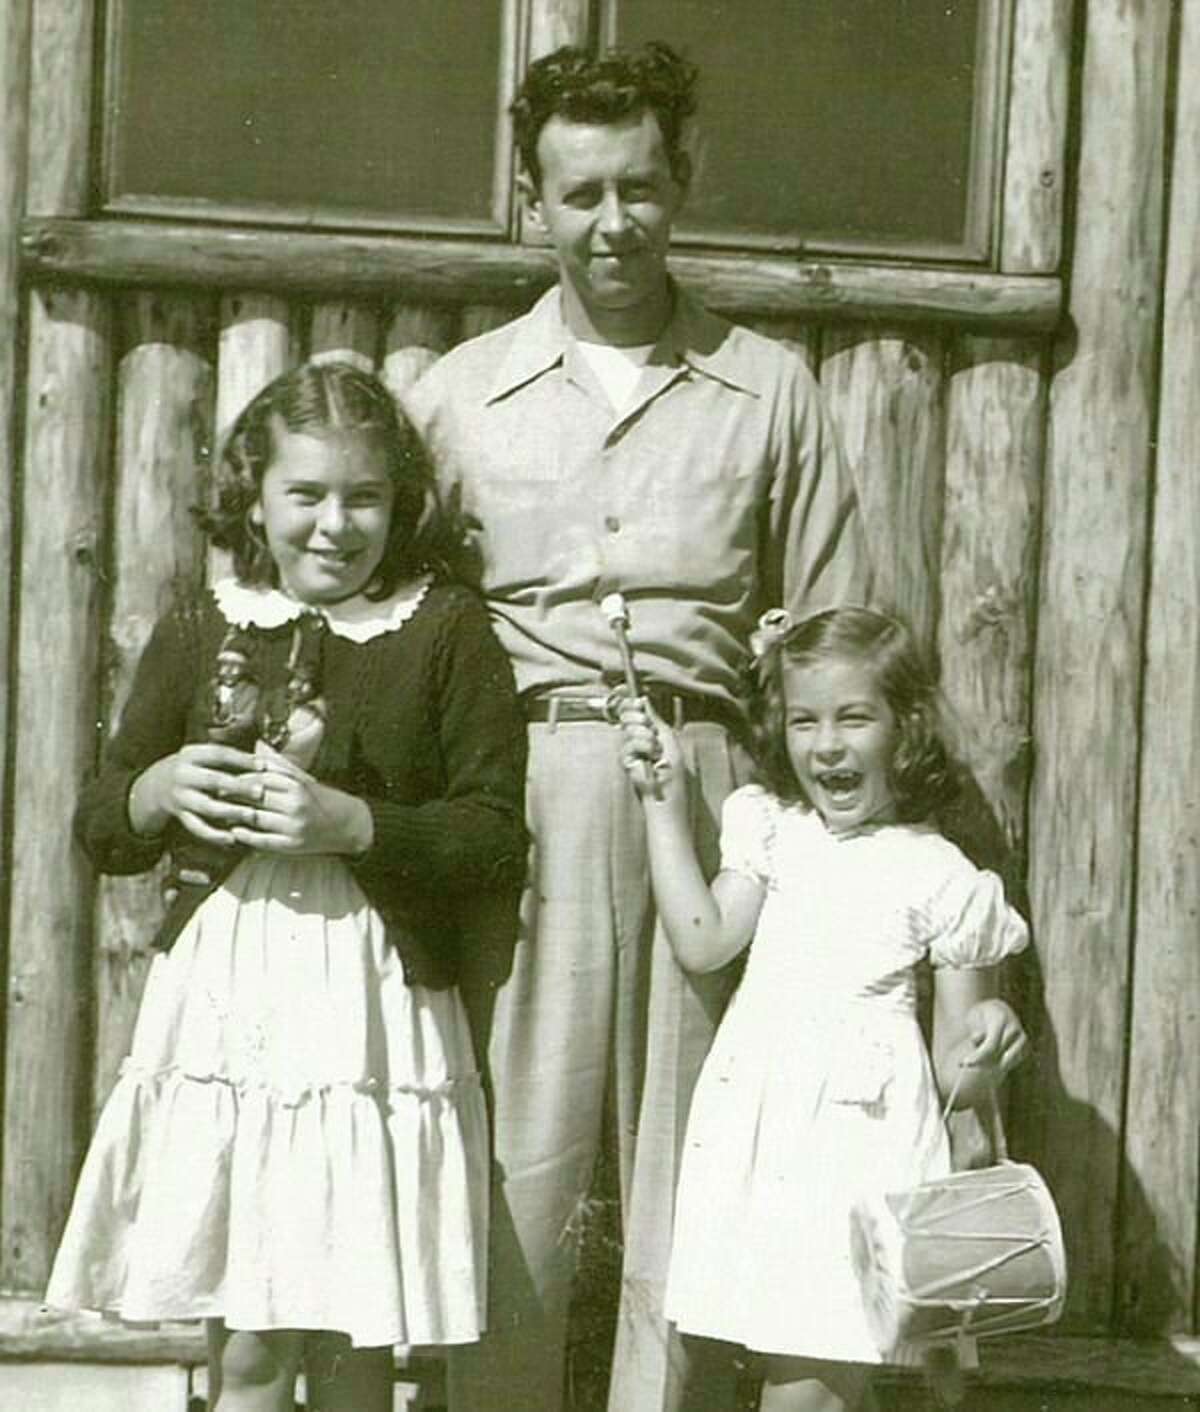 Ed Flore is with his two daughters, Bev on the left and Sally on the right. Ed and his brother Andrew had a produce business on Gordon Street where the H Hotel is now. Later Ed and Dorothy owned a motel in Clare. When they retired, they returned to Midland to enjoy their three grandsons, Jeffrey, Brian and Craig. 'Joyous is the word I come up with when I speak about my grandfather Ed Flore,' Craig said.